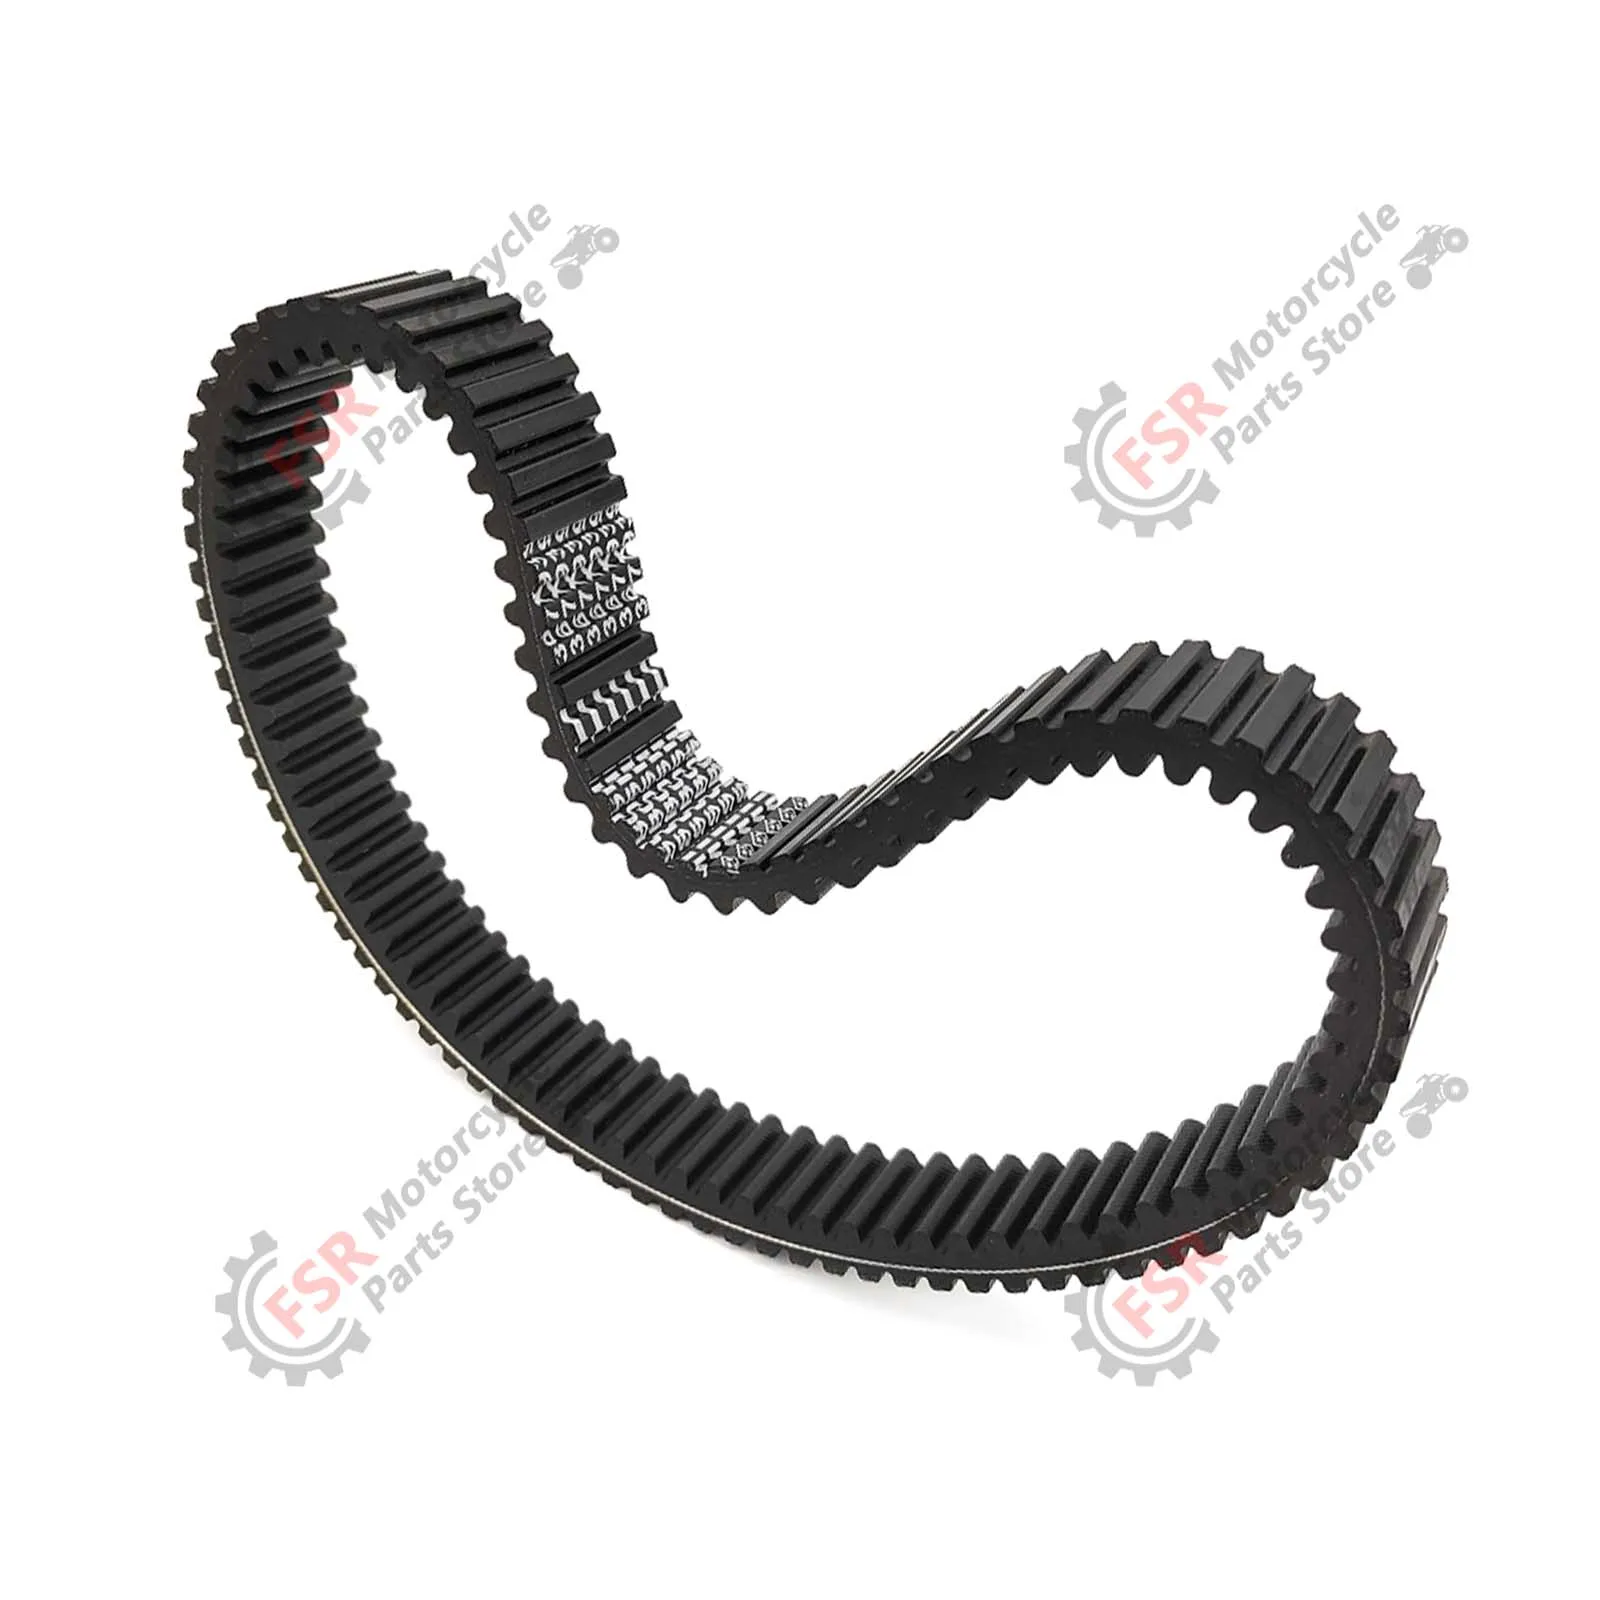 Transmission belt suitable for Dongfeng 500 ATV, farmer's vehicle, motorcycle 0180-055000-0001 Made in China gates polyflex wide angle belt 7m1320 7m1360 7m1400 7m1450 7m1500 7m1550 7m1600 7m1650 transmission triangle belt